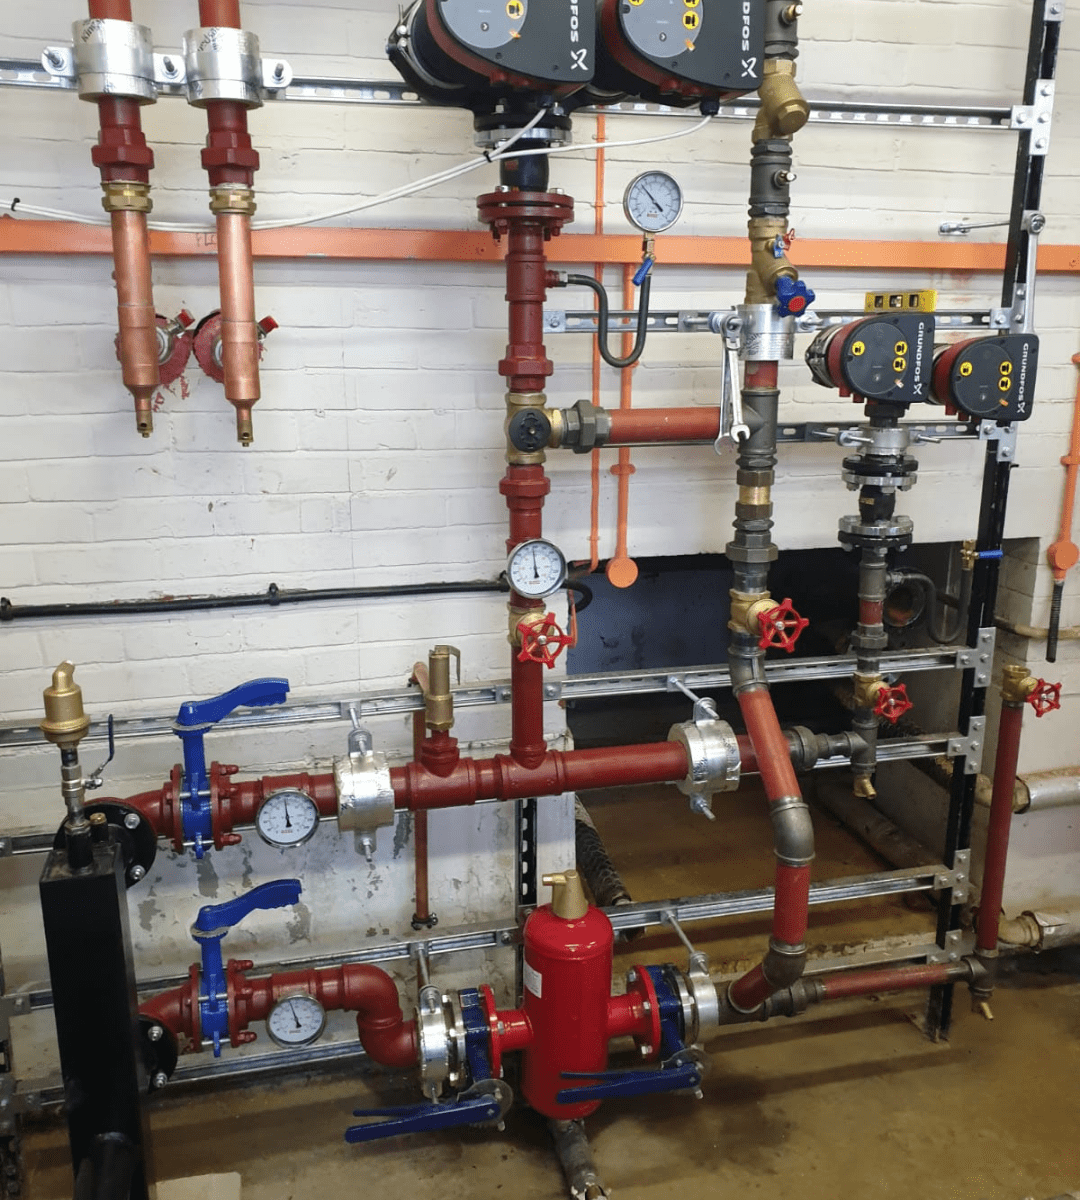 Castercliff Primary Academy School Plant Room Nelson Burnley Lancashire